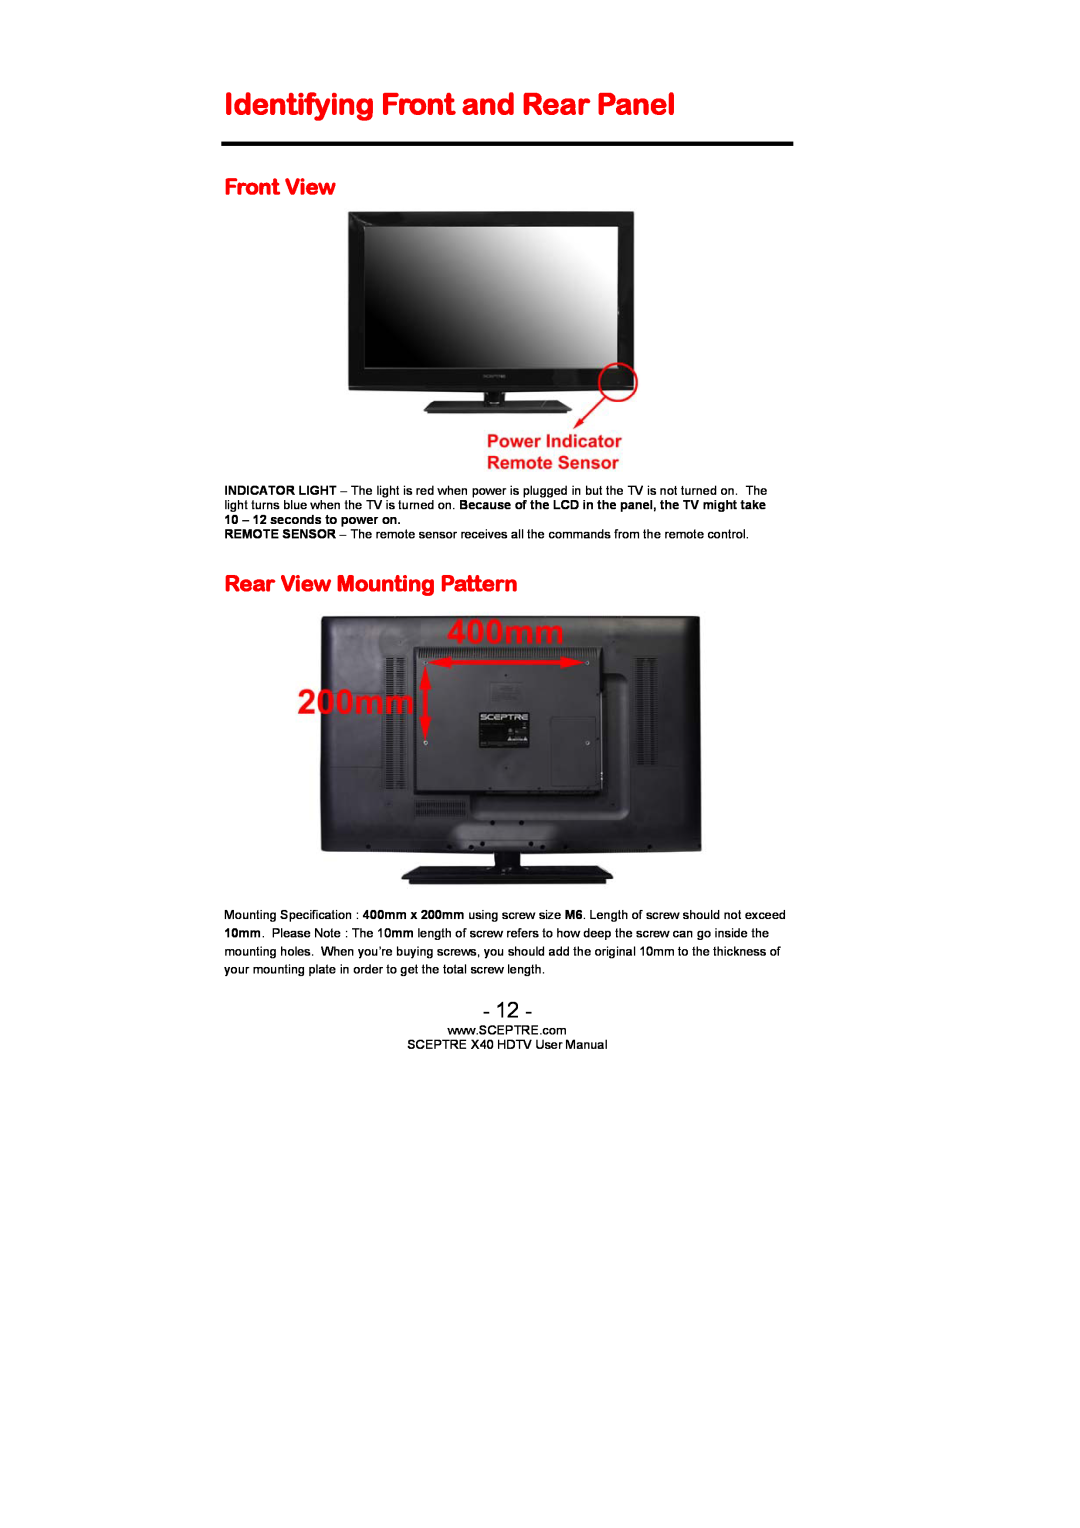 Sceptre Technologies SCEPTRE X40 HDTV user manual Identifying Front and Rear Panel, Front View, Rear View Mounting Pattern 